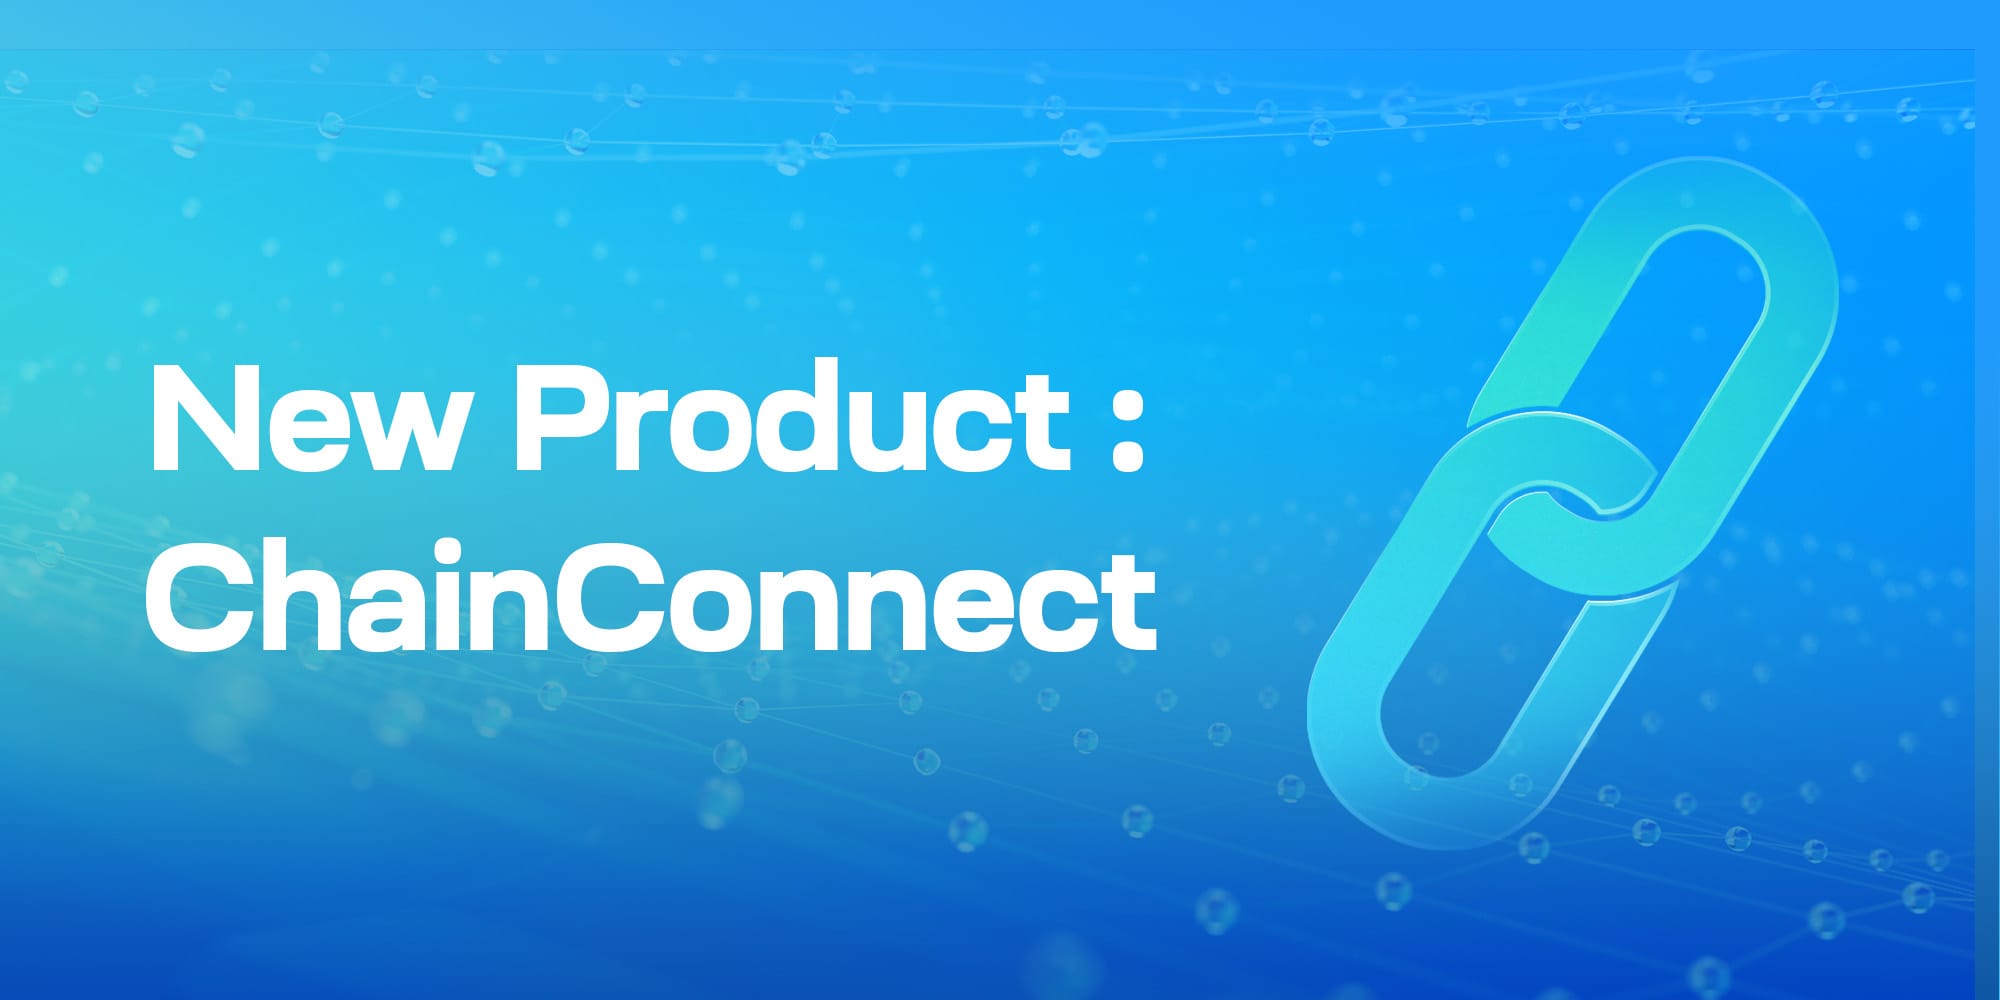 ChainConnect: An Innovative Programmatic Wallet and Token Generation Solution